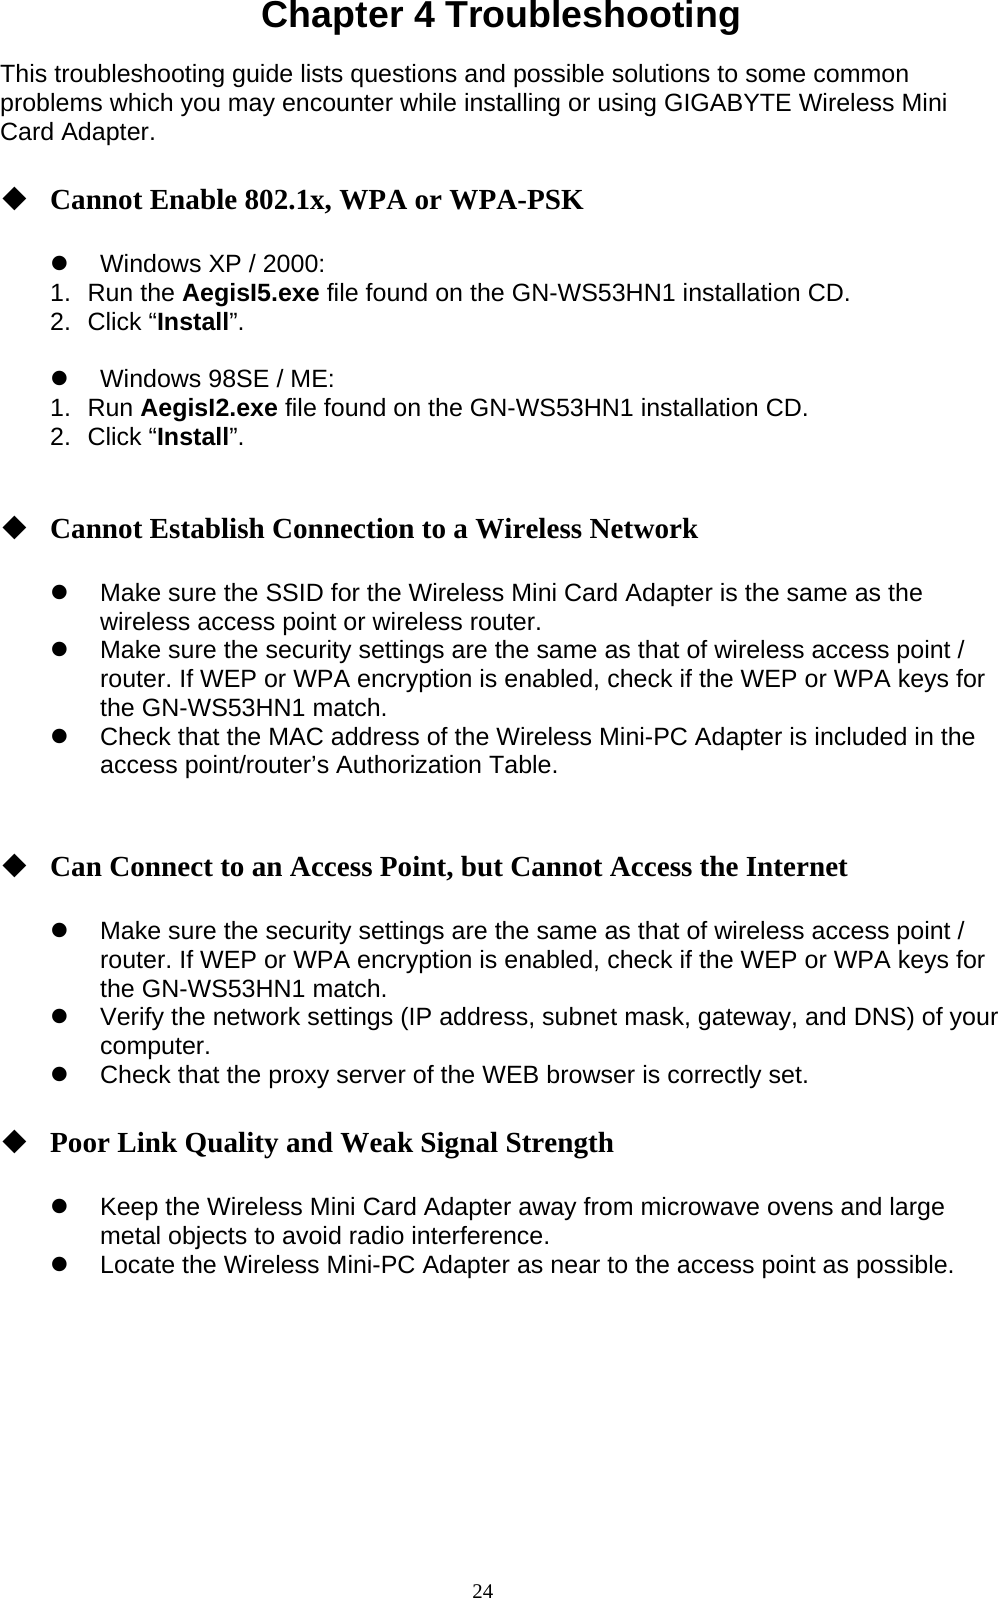 24  Chapter 4 Troubleshooting  This troubleshooting guide lists questions and possible solutions to some common problems which you may encounter while installing or using GIGABYTE Wireless Mini Card Adapter.   Cannot Enable 802.1x, WPA or WPA-PSK  z  Windows XP / 2000: 1. Run the AegisI5.exe file found on the GN-WS53HN1 installation CD. 2. Click “Install”.  z  Windows 98SE / ME: 1. Run AegisI2.exe file found on the GN-WS53HN1 installation CD. 2. Click “Install”.    Cannot Establish Connection to a Wireless Network  z  Make sure the SSID for the Wireless Mini Card Adapter is the same as the wireless access point or wireless router. z  Make sure the security settings are the same as that of wireless access point / router. If WEP or WPA encryption is enabled, check if the WEP or WPA keys for the GN-WS53HN1 match.   z  Check that the MAC address of the Wireless Mini-PC Adapter is included in the access point/router’s Authorization Table.      Can Connect to an Access Point, but Cannot Access the Internet  z  Make sure the security settings are the same as that of wireless access point / router. If WEP or WPA encryption is enabled, check if the WEP or WPA keys for the GN-WS53HN1 match.   z  Verify the network settings (IP address, subnet mask, gateway, and DNS) of your computer. z  Check that the proxy server of the WEB browser is correctly set.   Poor Link Quality and Weak Signal Strength  z  Keep the Wireless Mini Card Adapter away from microwave ovens and large metal objects to avoid radio interference. z  Locate the Wireless Mini-PC Adapter as near to the access point as possible.   